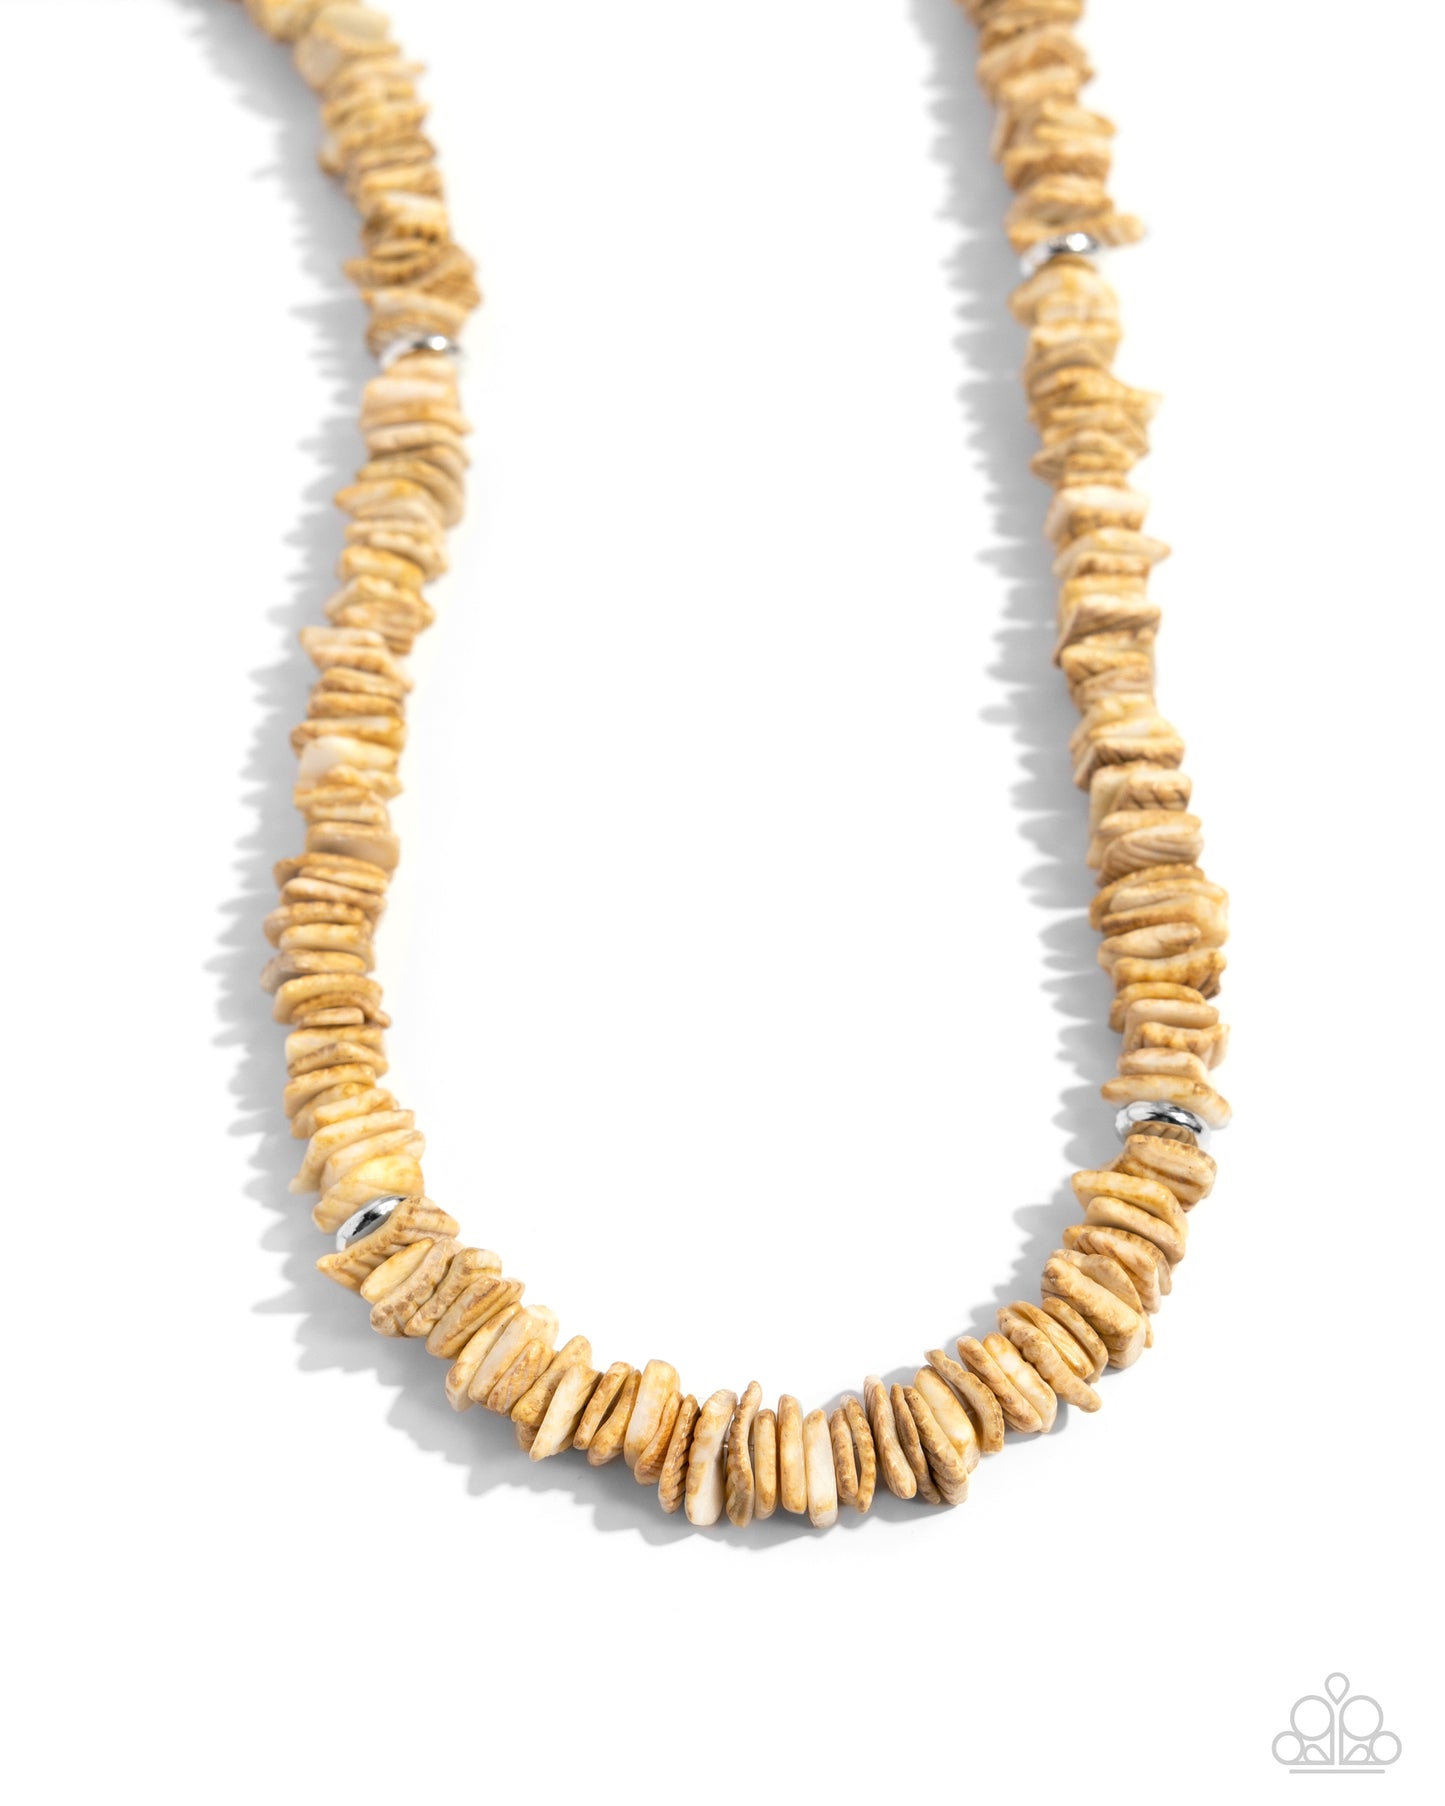 <p>Modeled after a puka shell necklace, chiseled tan shells are infused along an invisible string around the neckline with silver discs sporadically interrupting the design for a touch of monochromatic color. Features an adjustable clasp closure.</p> <p><i>Sold as one individual necklace.</i></p>